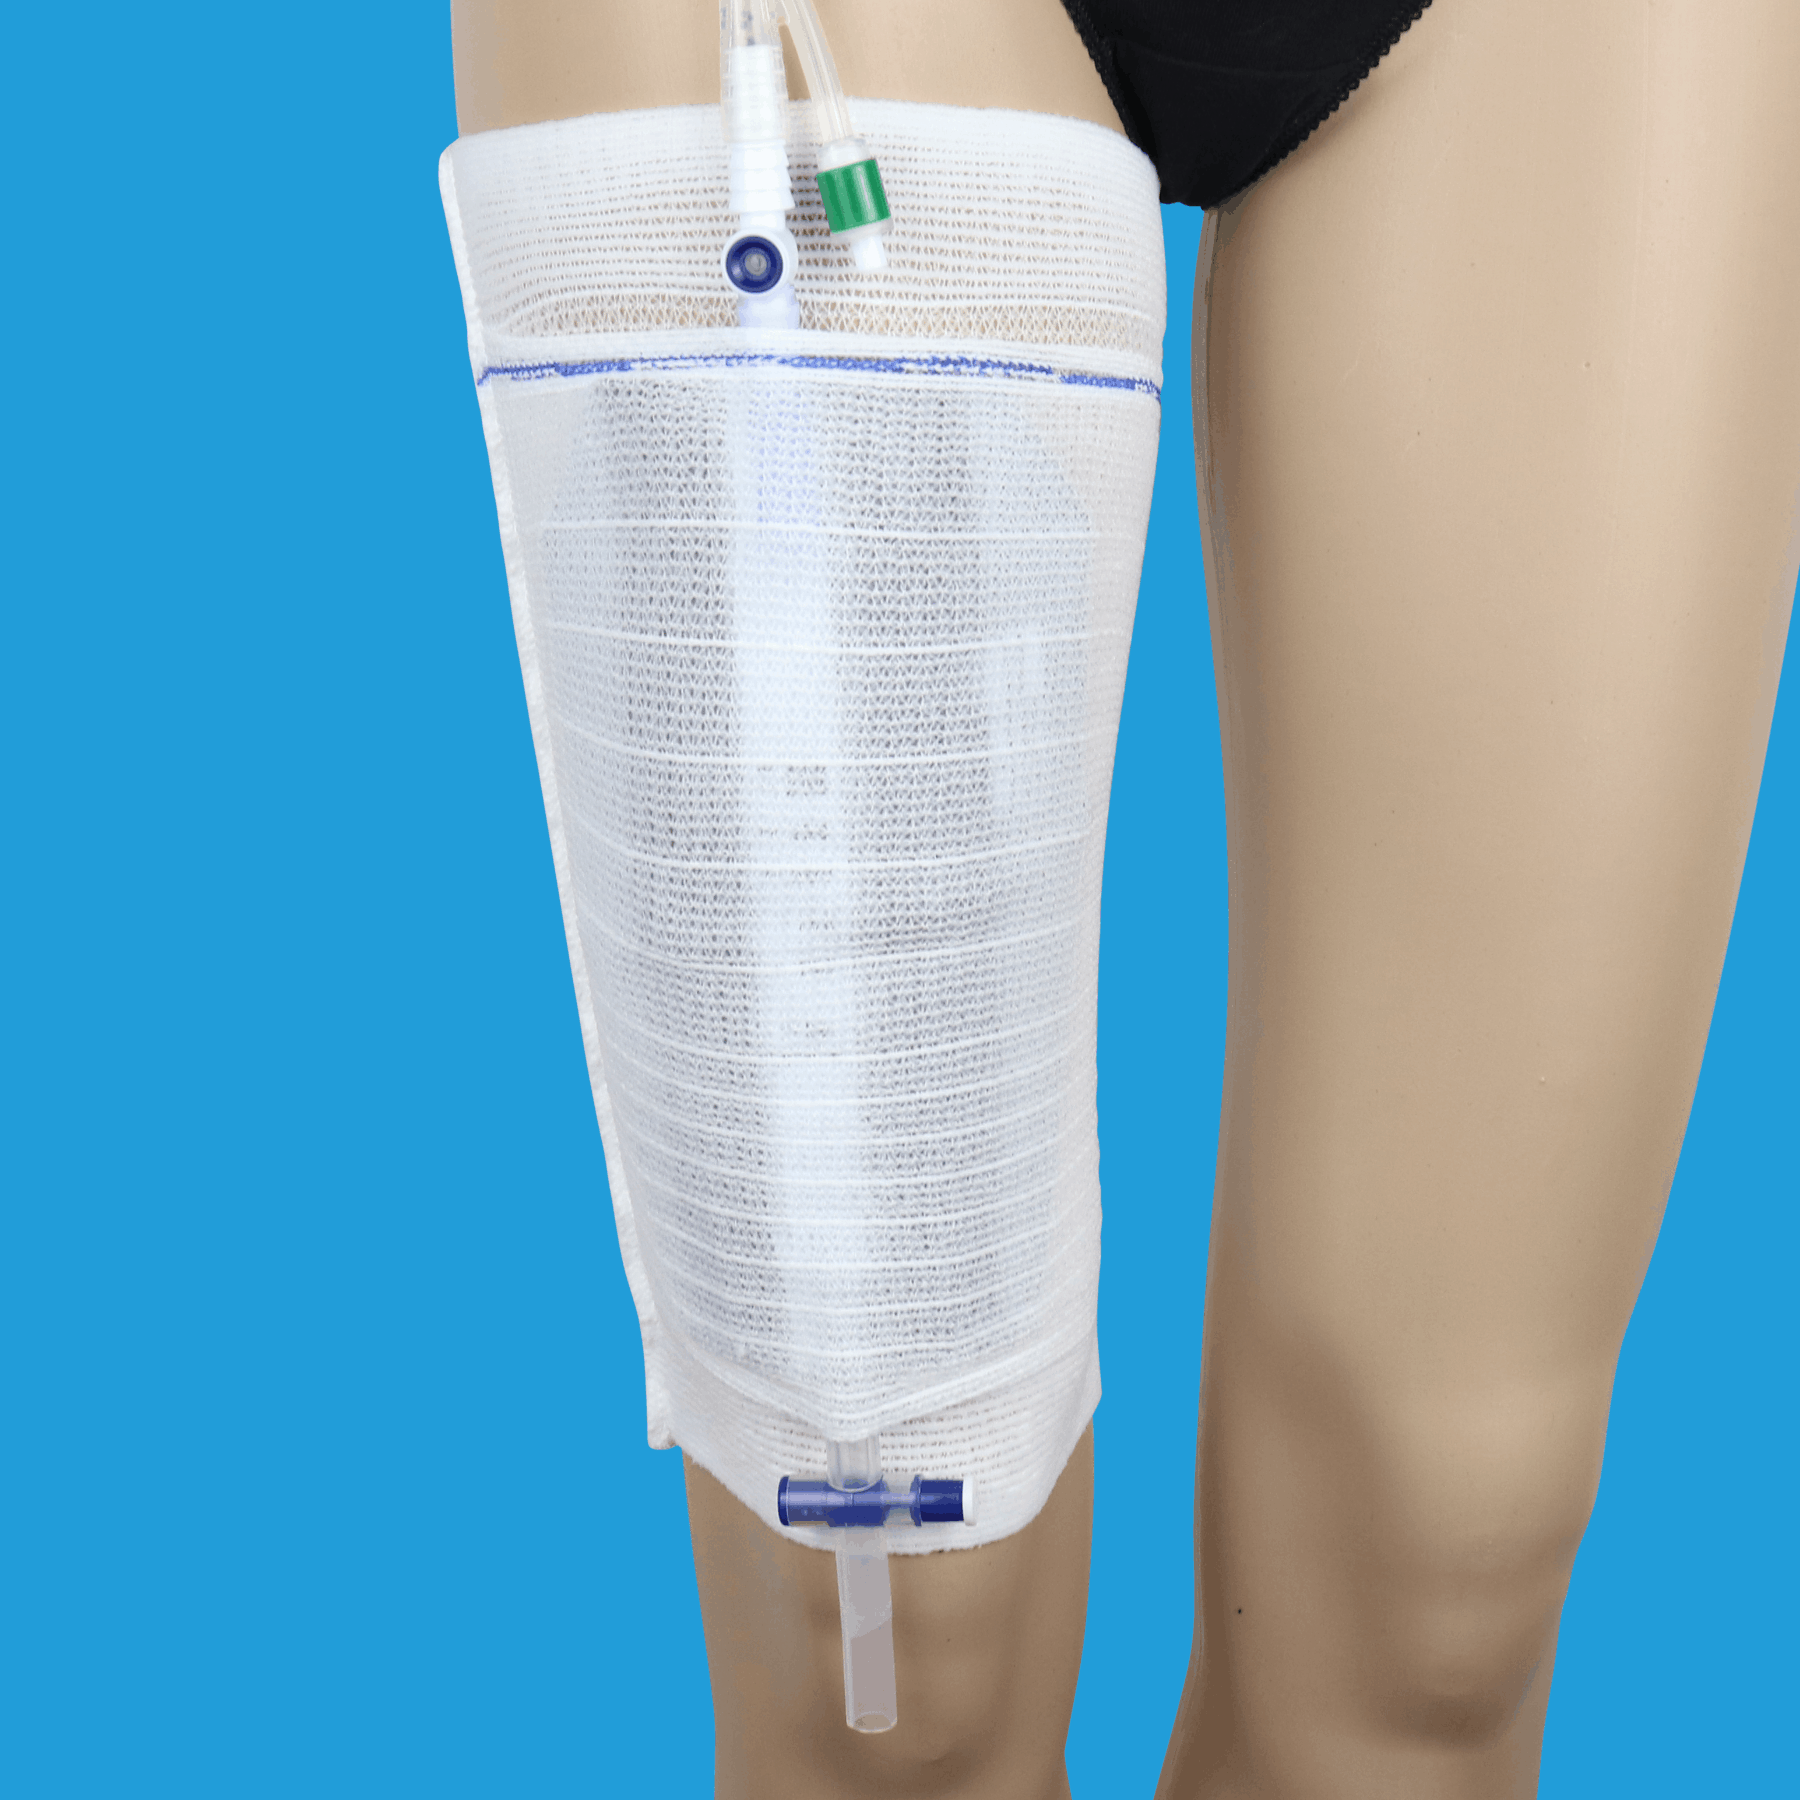 Read about the Conveen urine bags and urisheaths | Coloplast - Coloplast UK